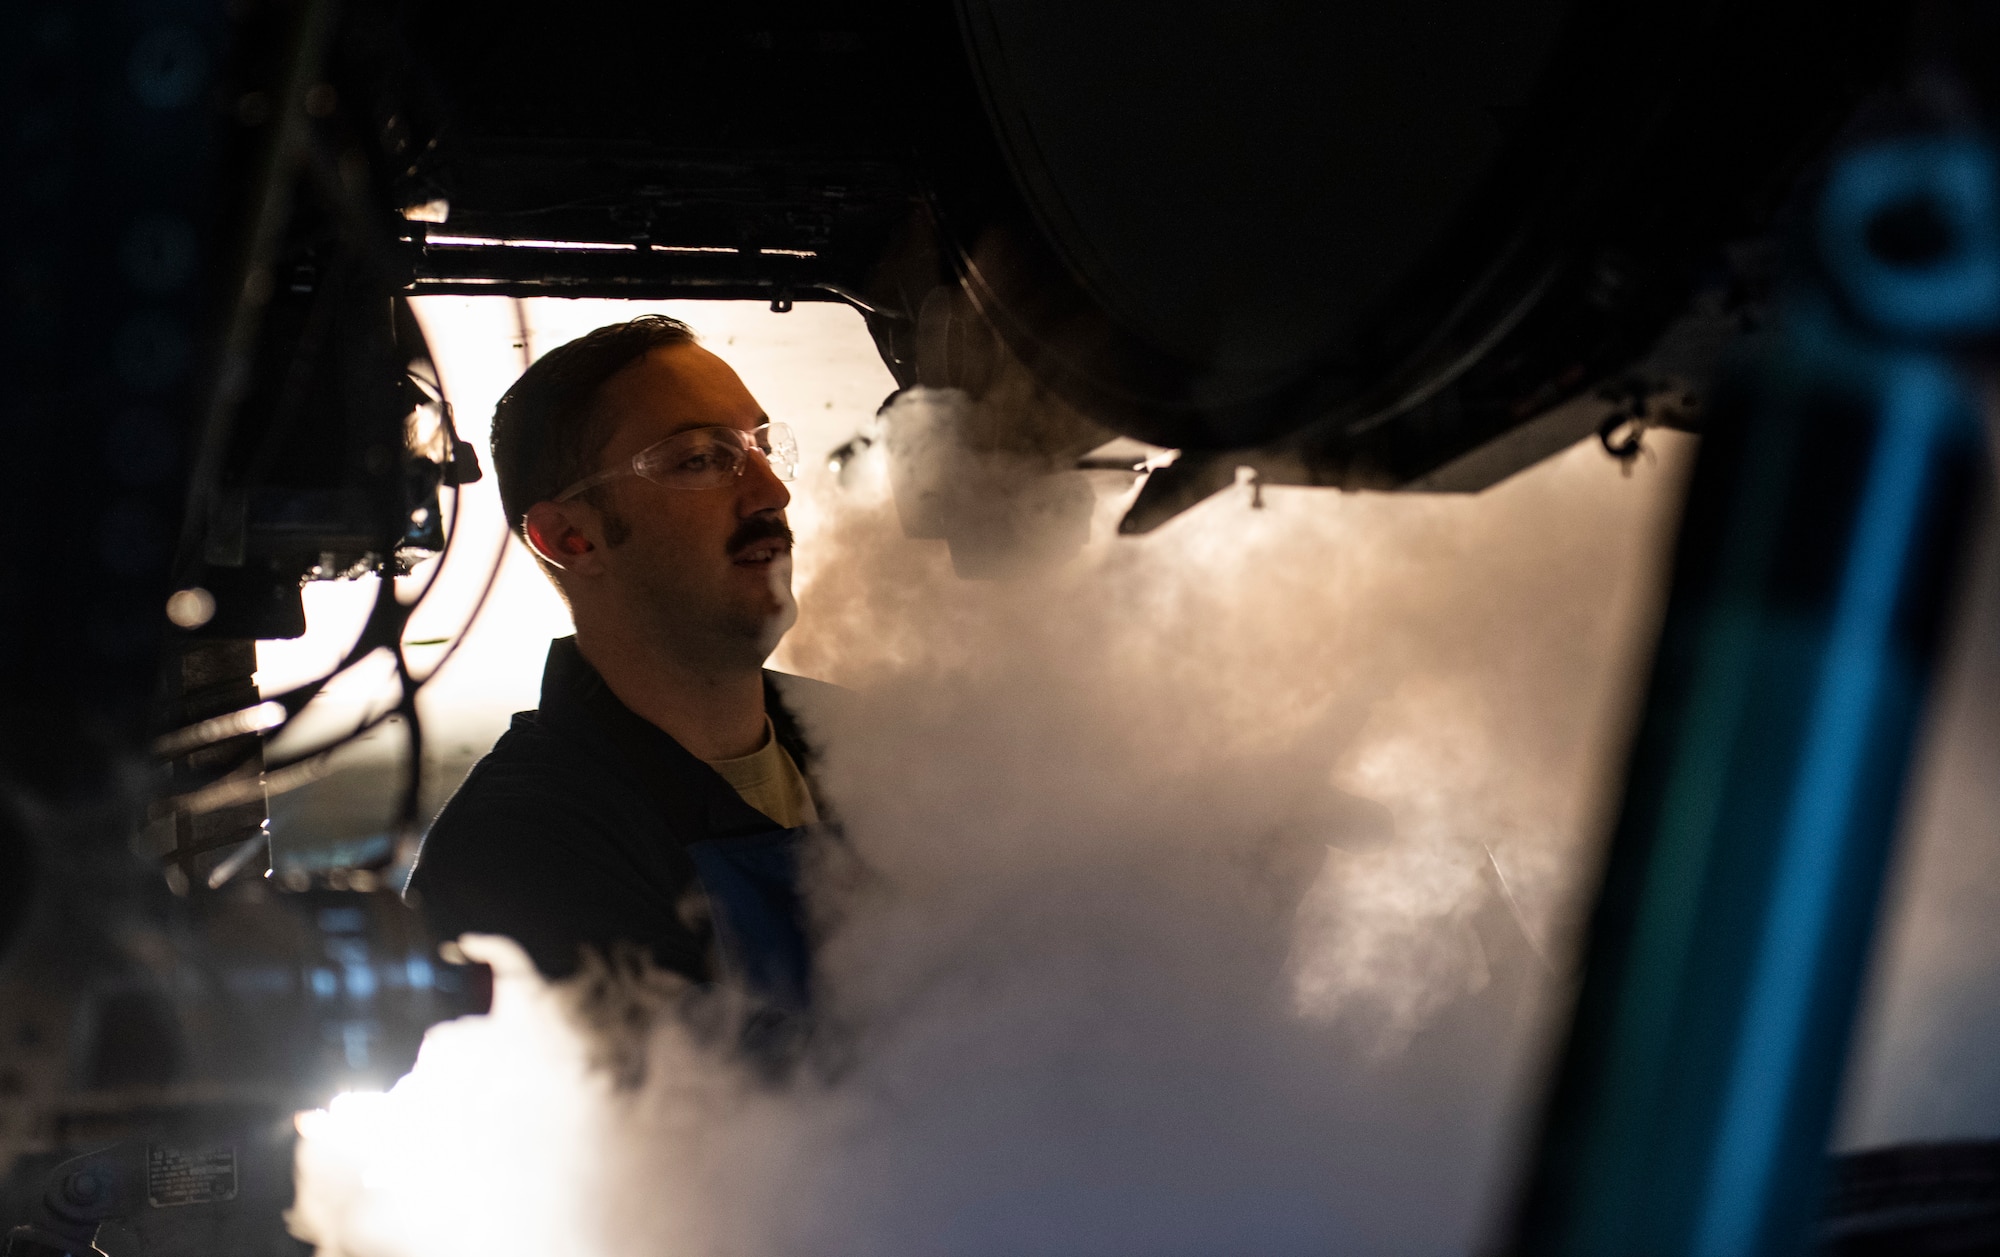 U.S. Air Force Tech. Sgt. Tyler Stratman, 309th Aircraft Maintenance Group depot structural maintenance specialist from Hill Air Force Base, Utah, sprays the bulkhead of an F-16 Fighting Falcon with liquid nitrogen at Kunsan Air Base, Republic of Korea, Nov. 8, 2018. Due to normal wear and tear after years of flying and performing combat and training operations, the bulkhead had to be replaced in order to maintain the F-16 Fighting Falcon’s lethality. (U.S. Air Force photo by Senior Airman Stefan Alvarez)